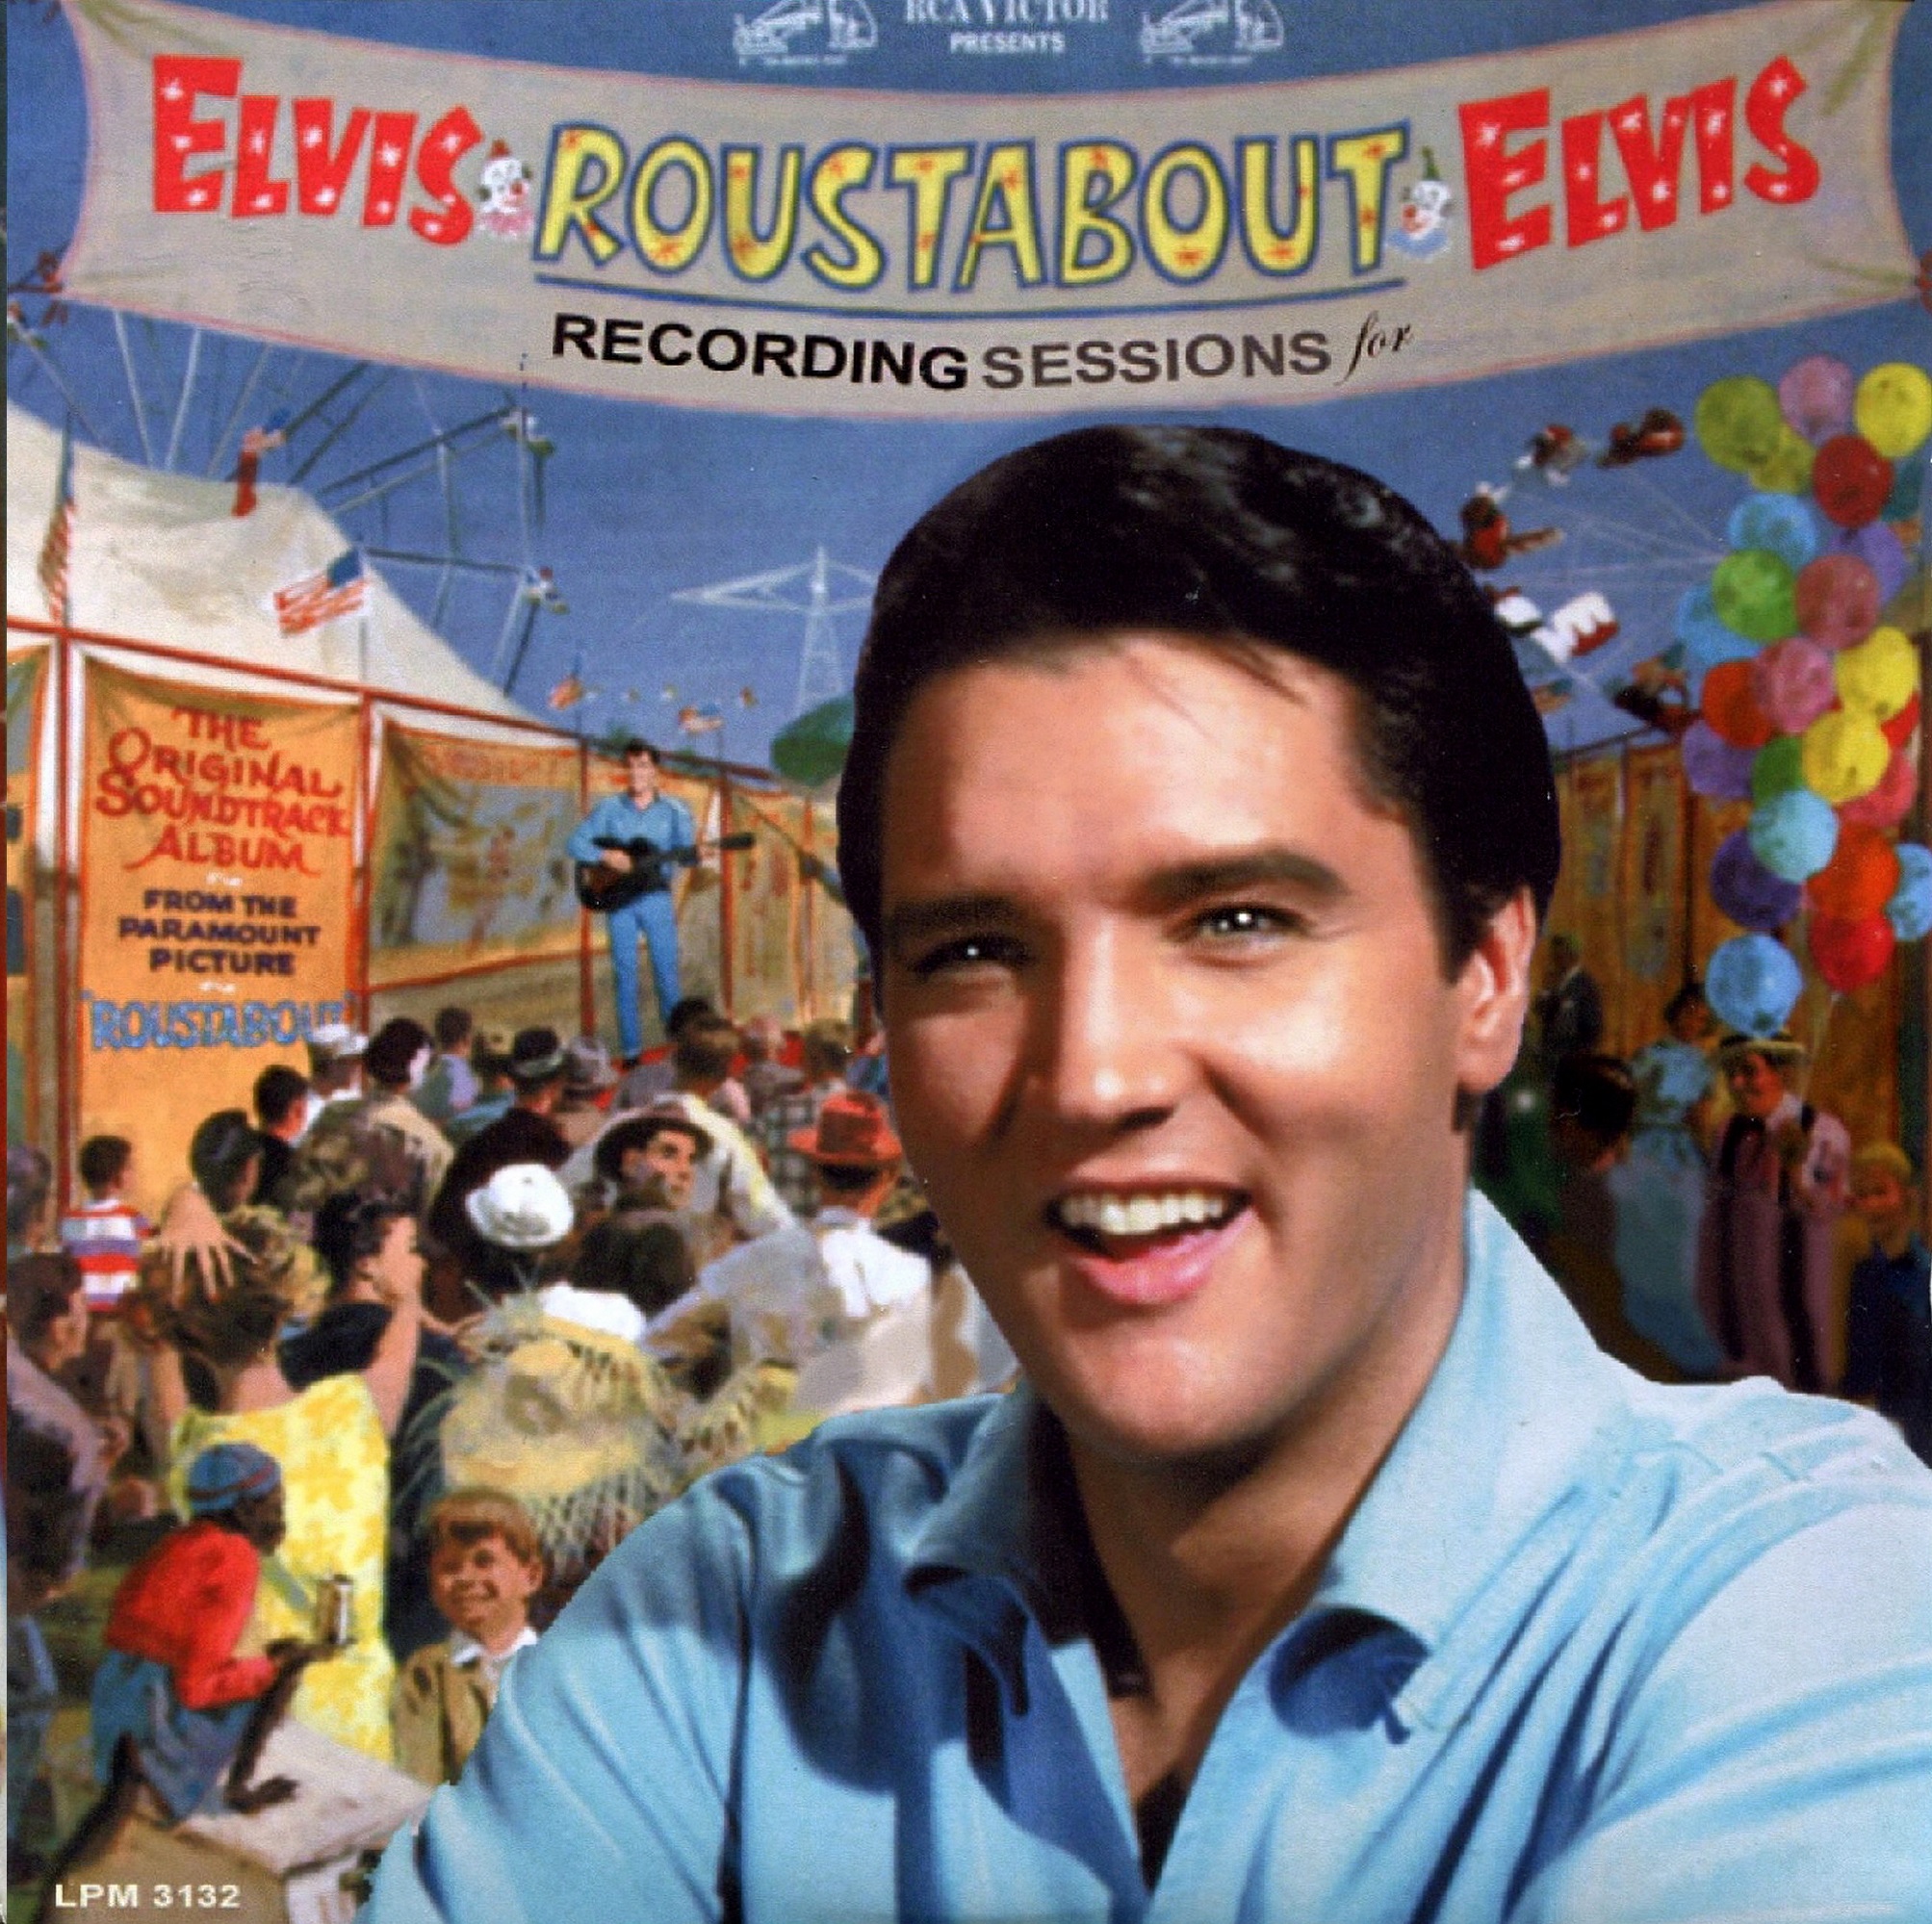 Elvis Presley - Recording Sessions For Roustabout [CMT Star LPM3132]